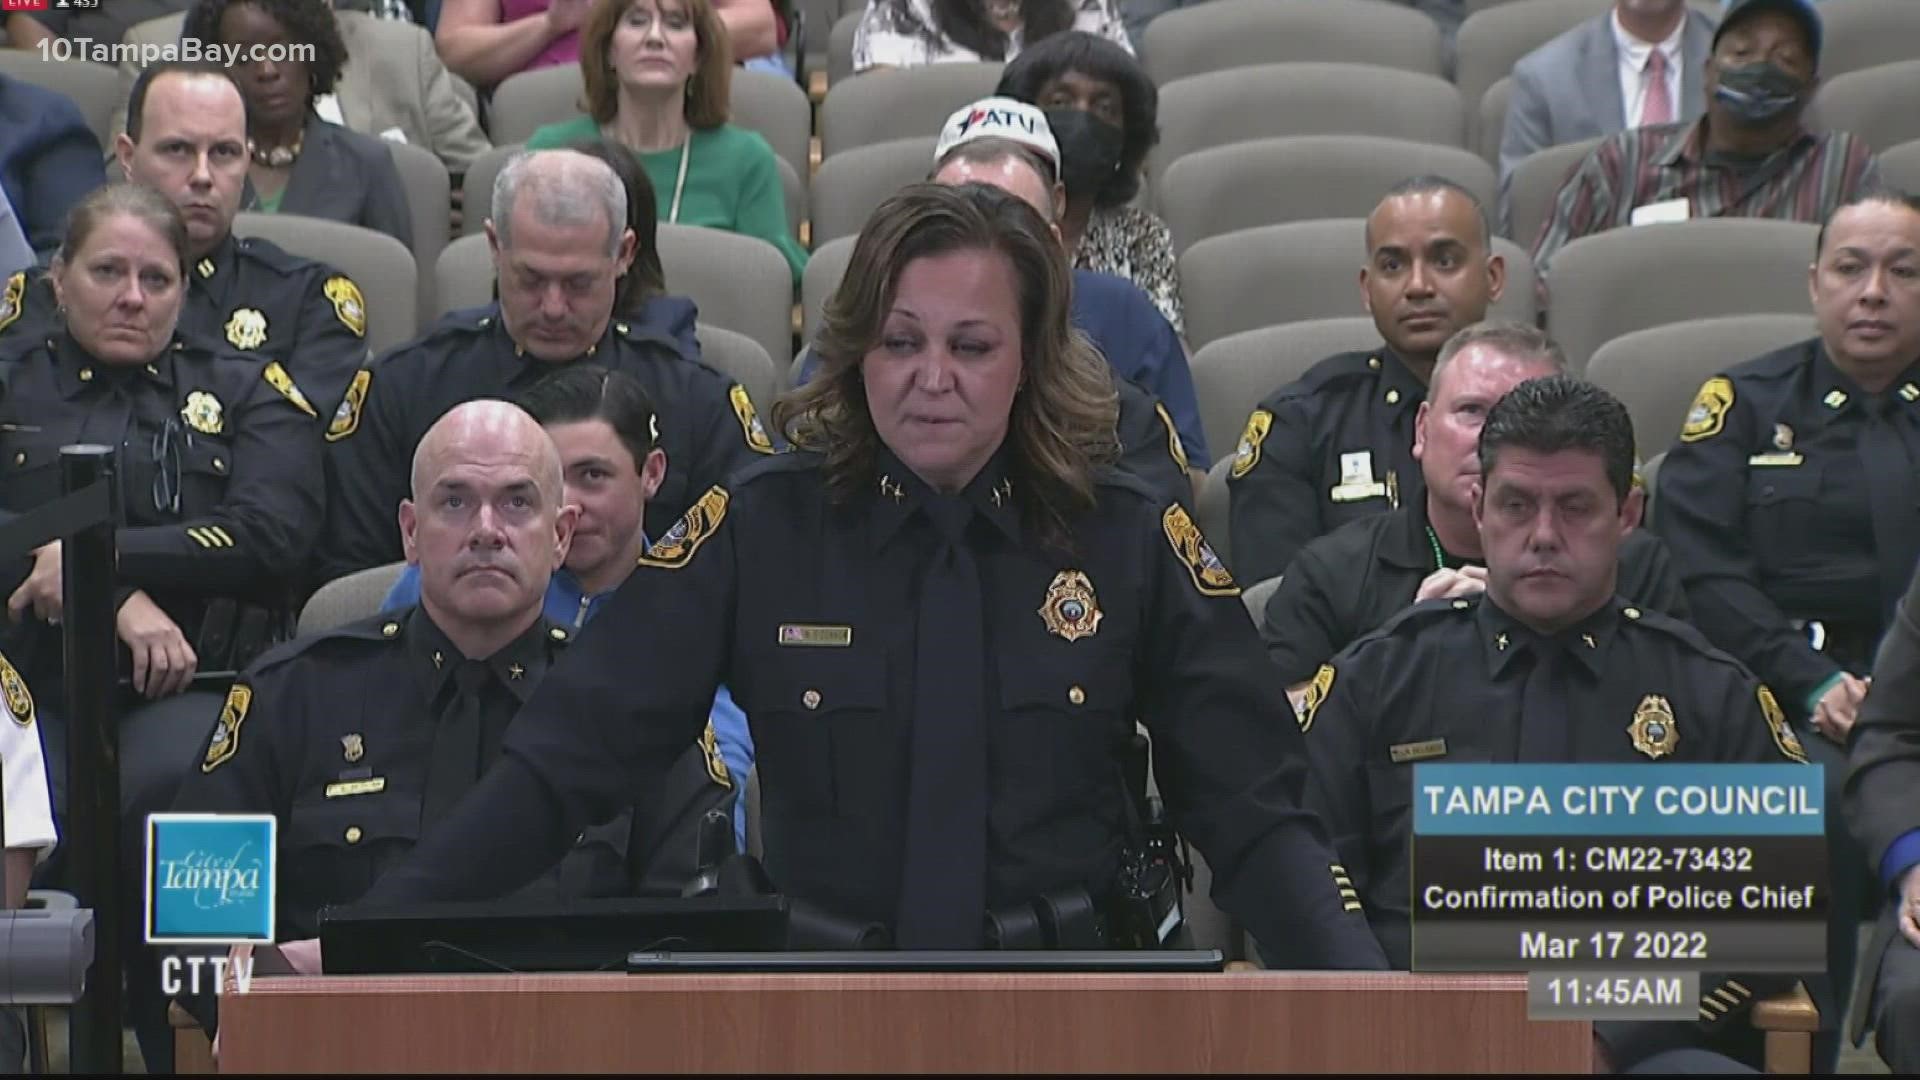 O'Connor has been serving as chief of police since Mayor Jane Castor appointed her on Feb. 8. Thursday's vote makes permanent her appointment.